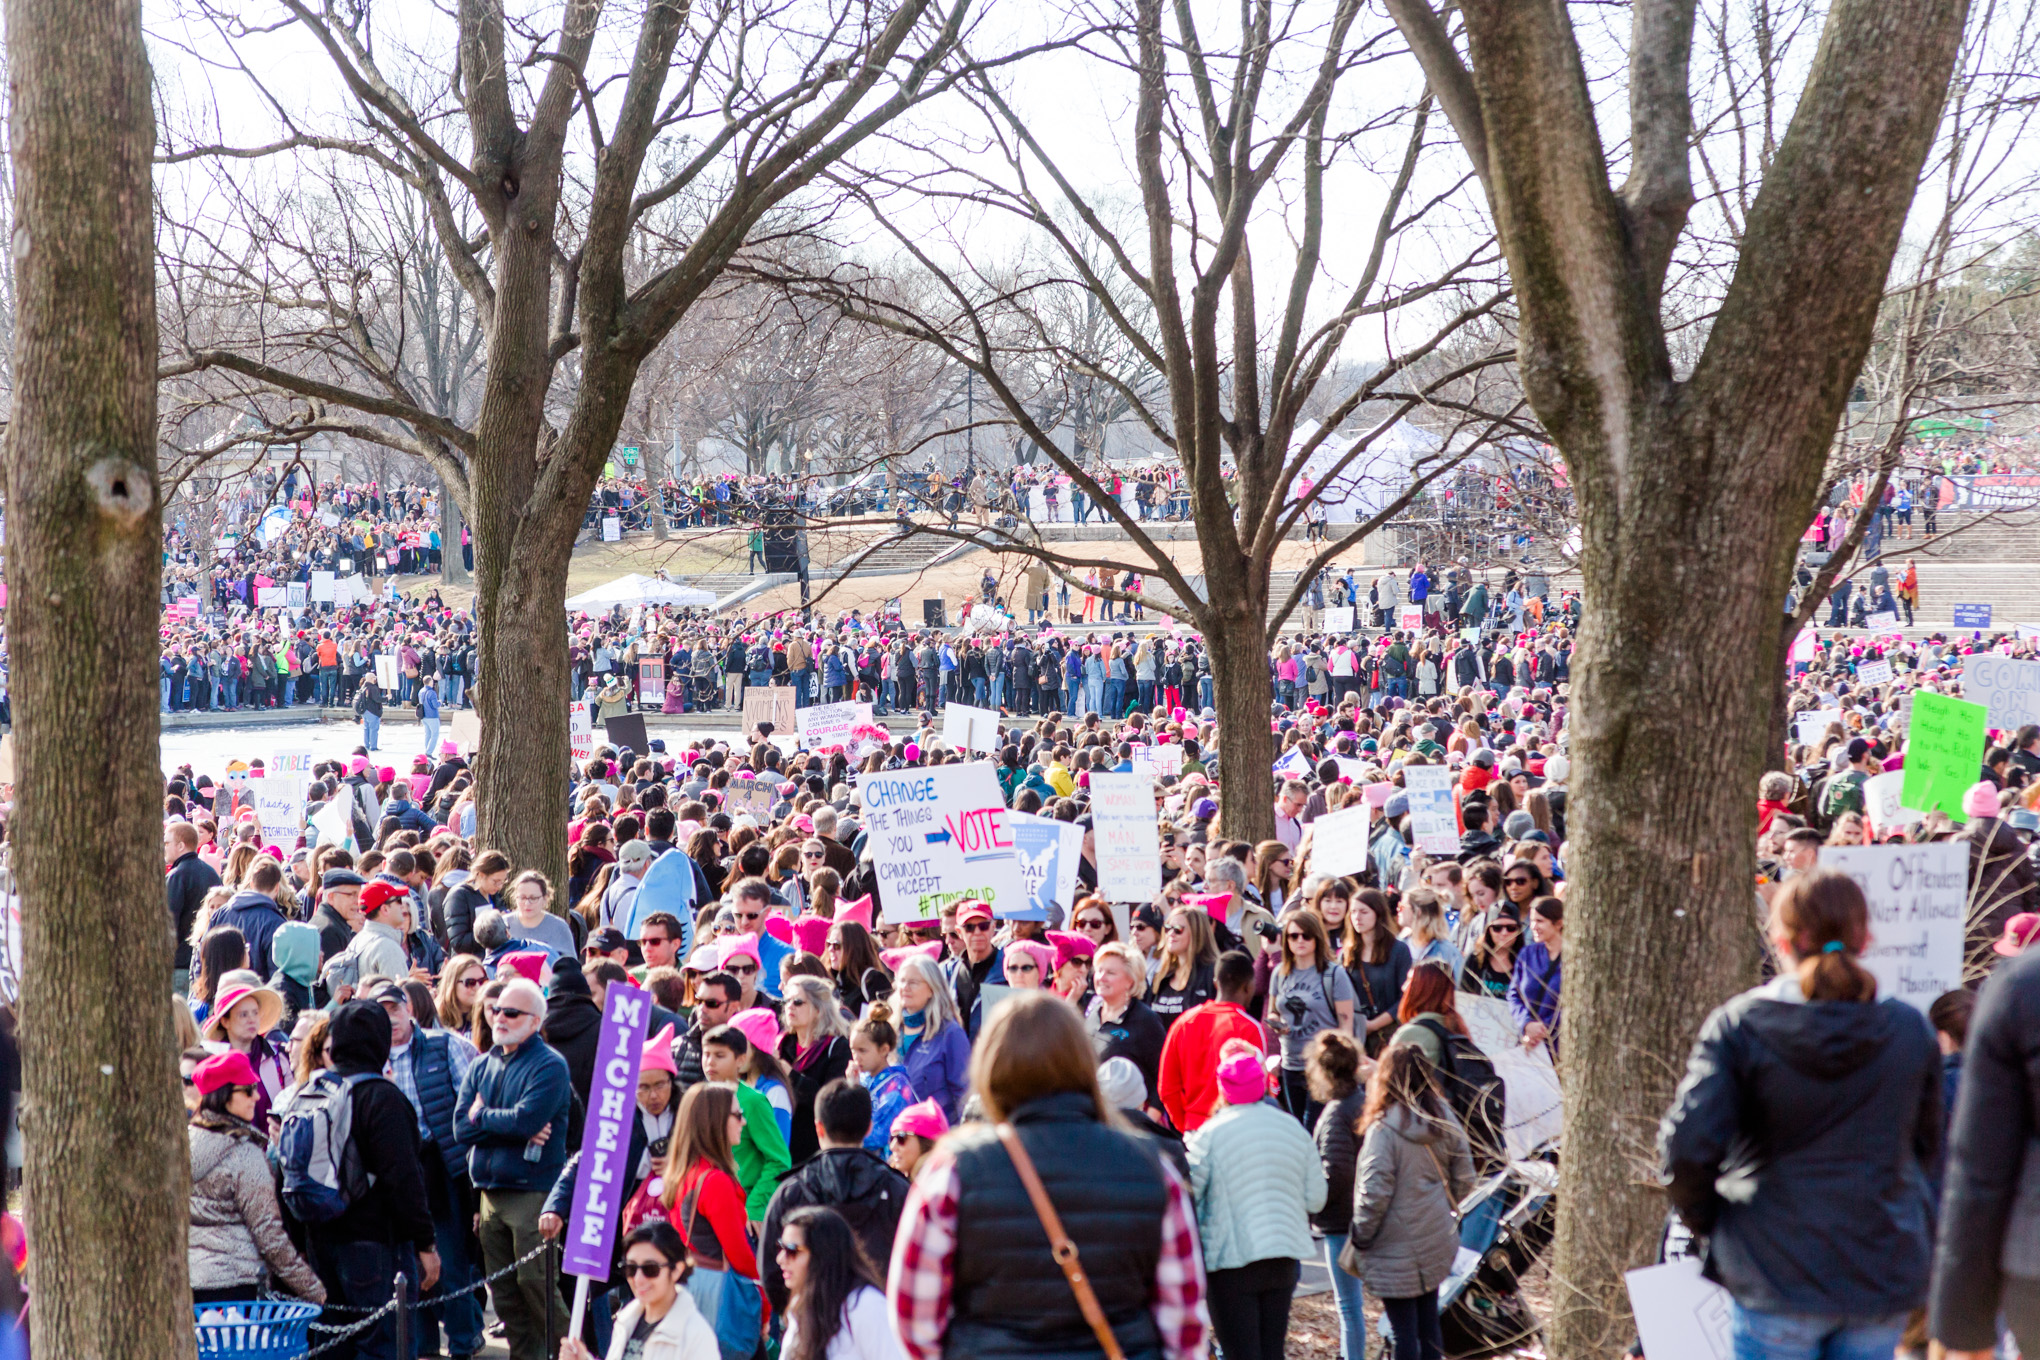 DC Women's March, Women's March, Washington, DC, photo journalism, January 2018, National Mall, Reflecting Pool, protest, rally